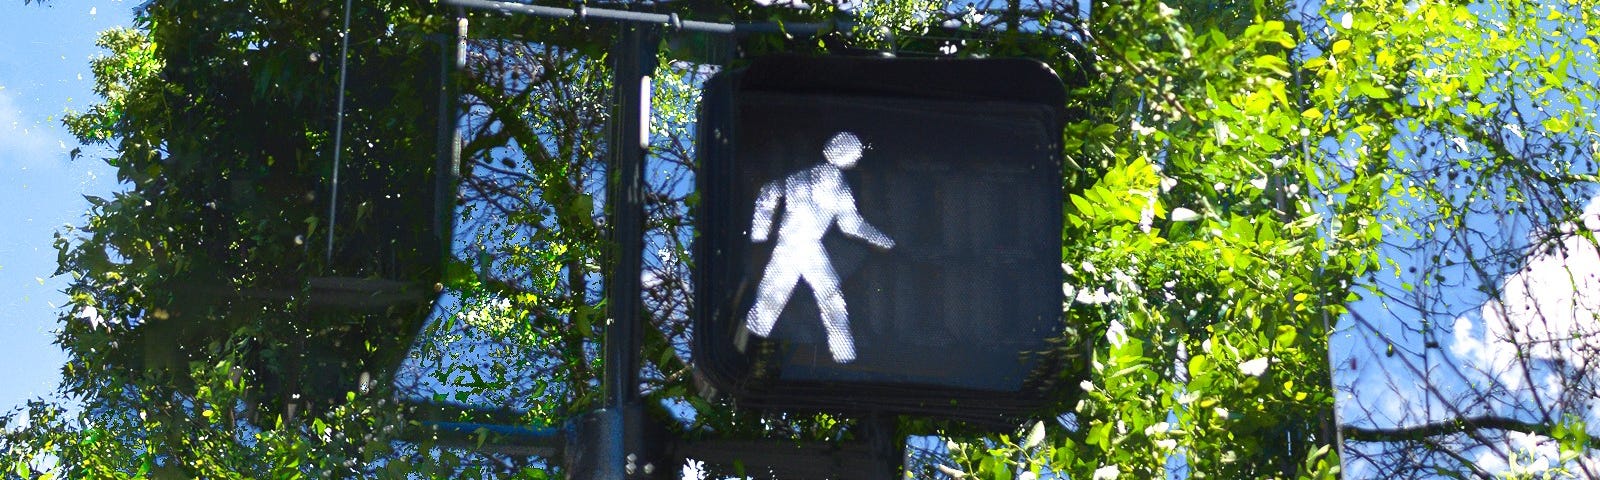 Crosswalk showing walking figure, trees and blue sky in the background.